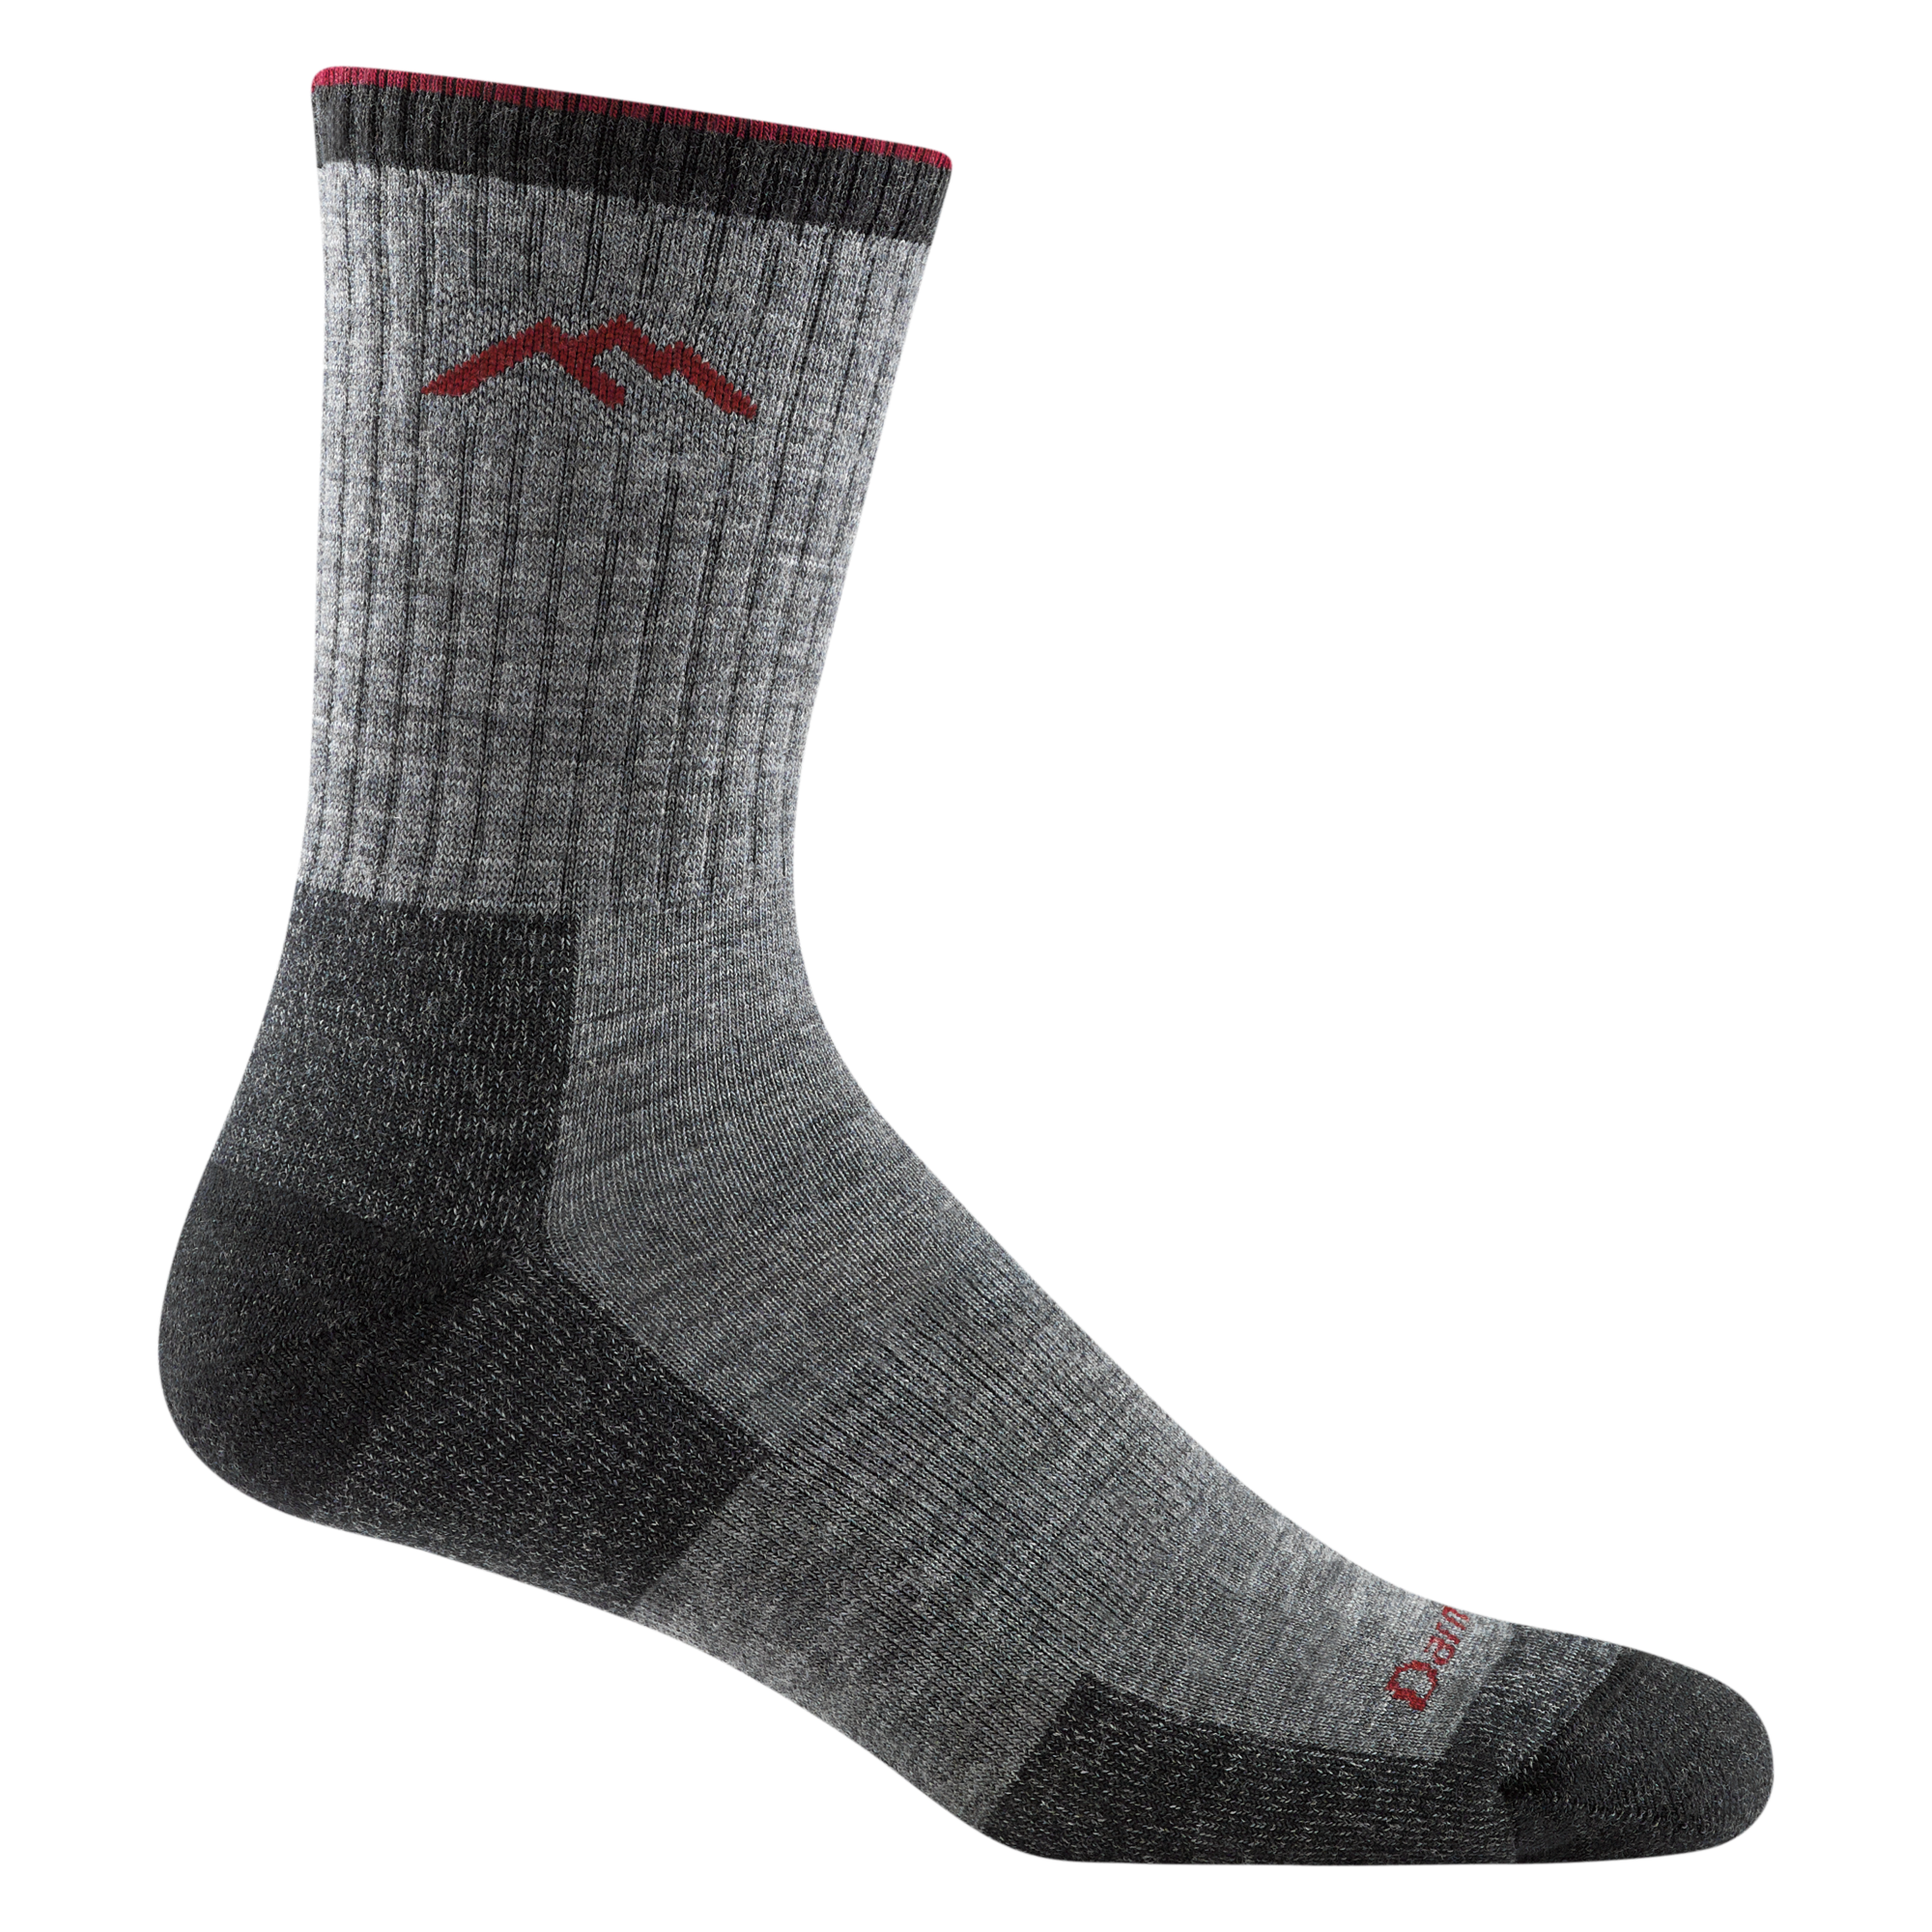 1466 men's micro crew hiking sock in color charcoal with black toe/heel accents and red darn tough signature on forefoot